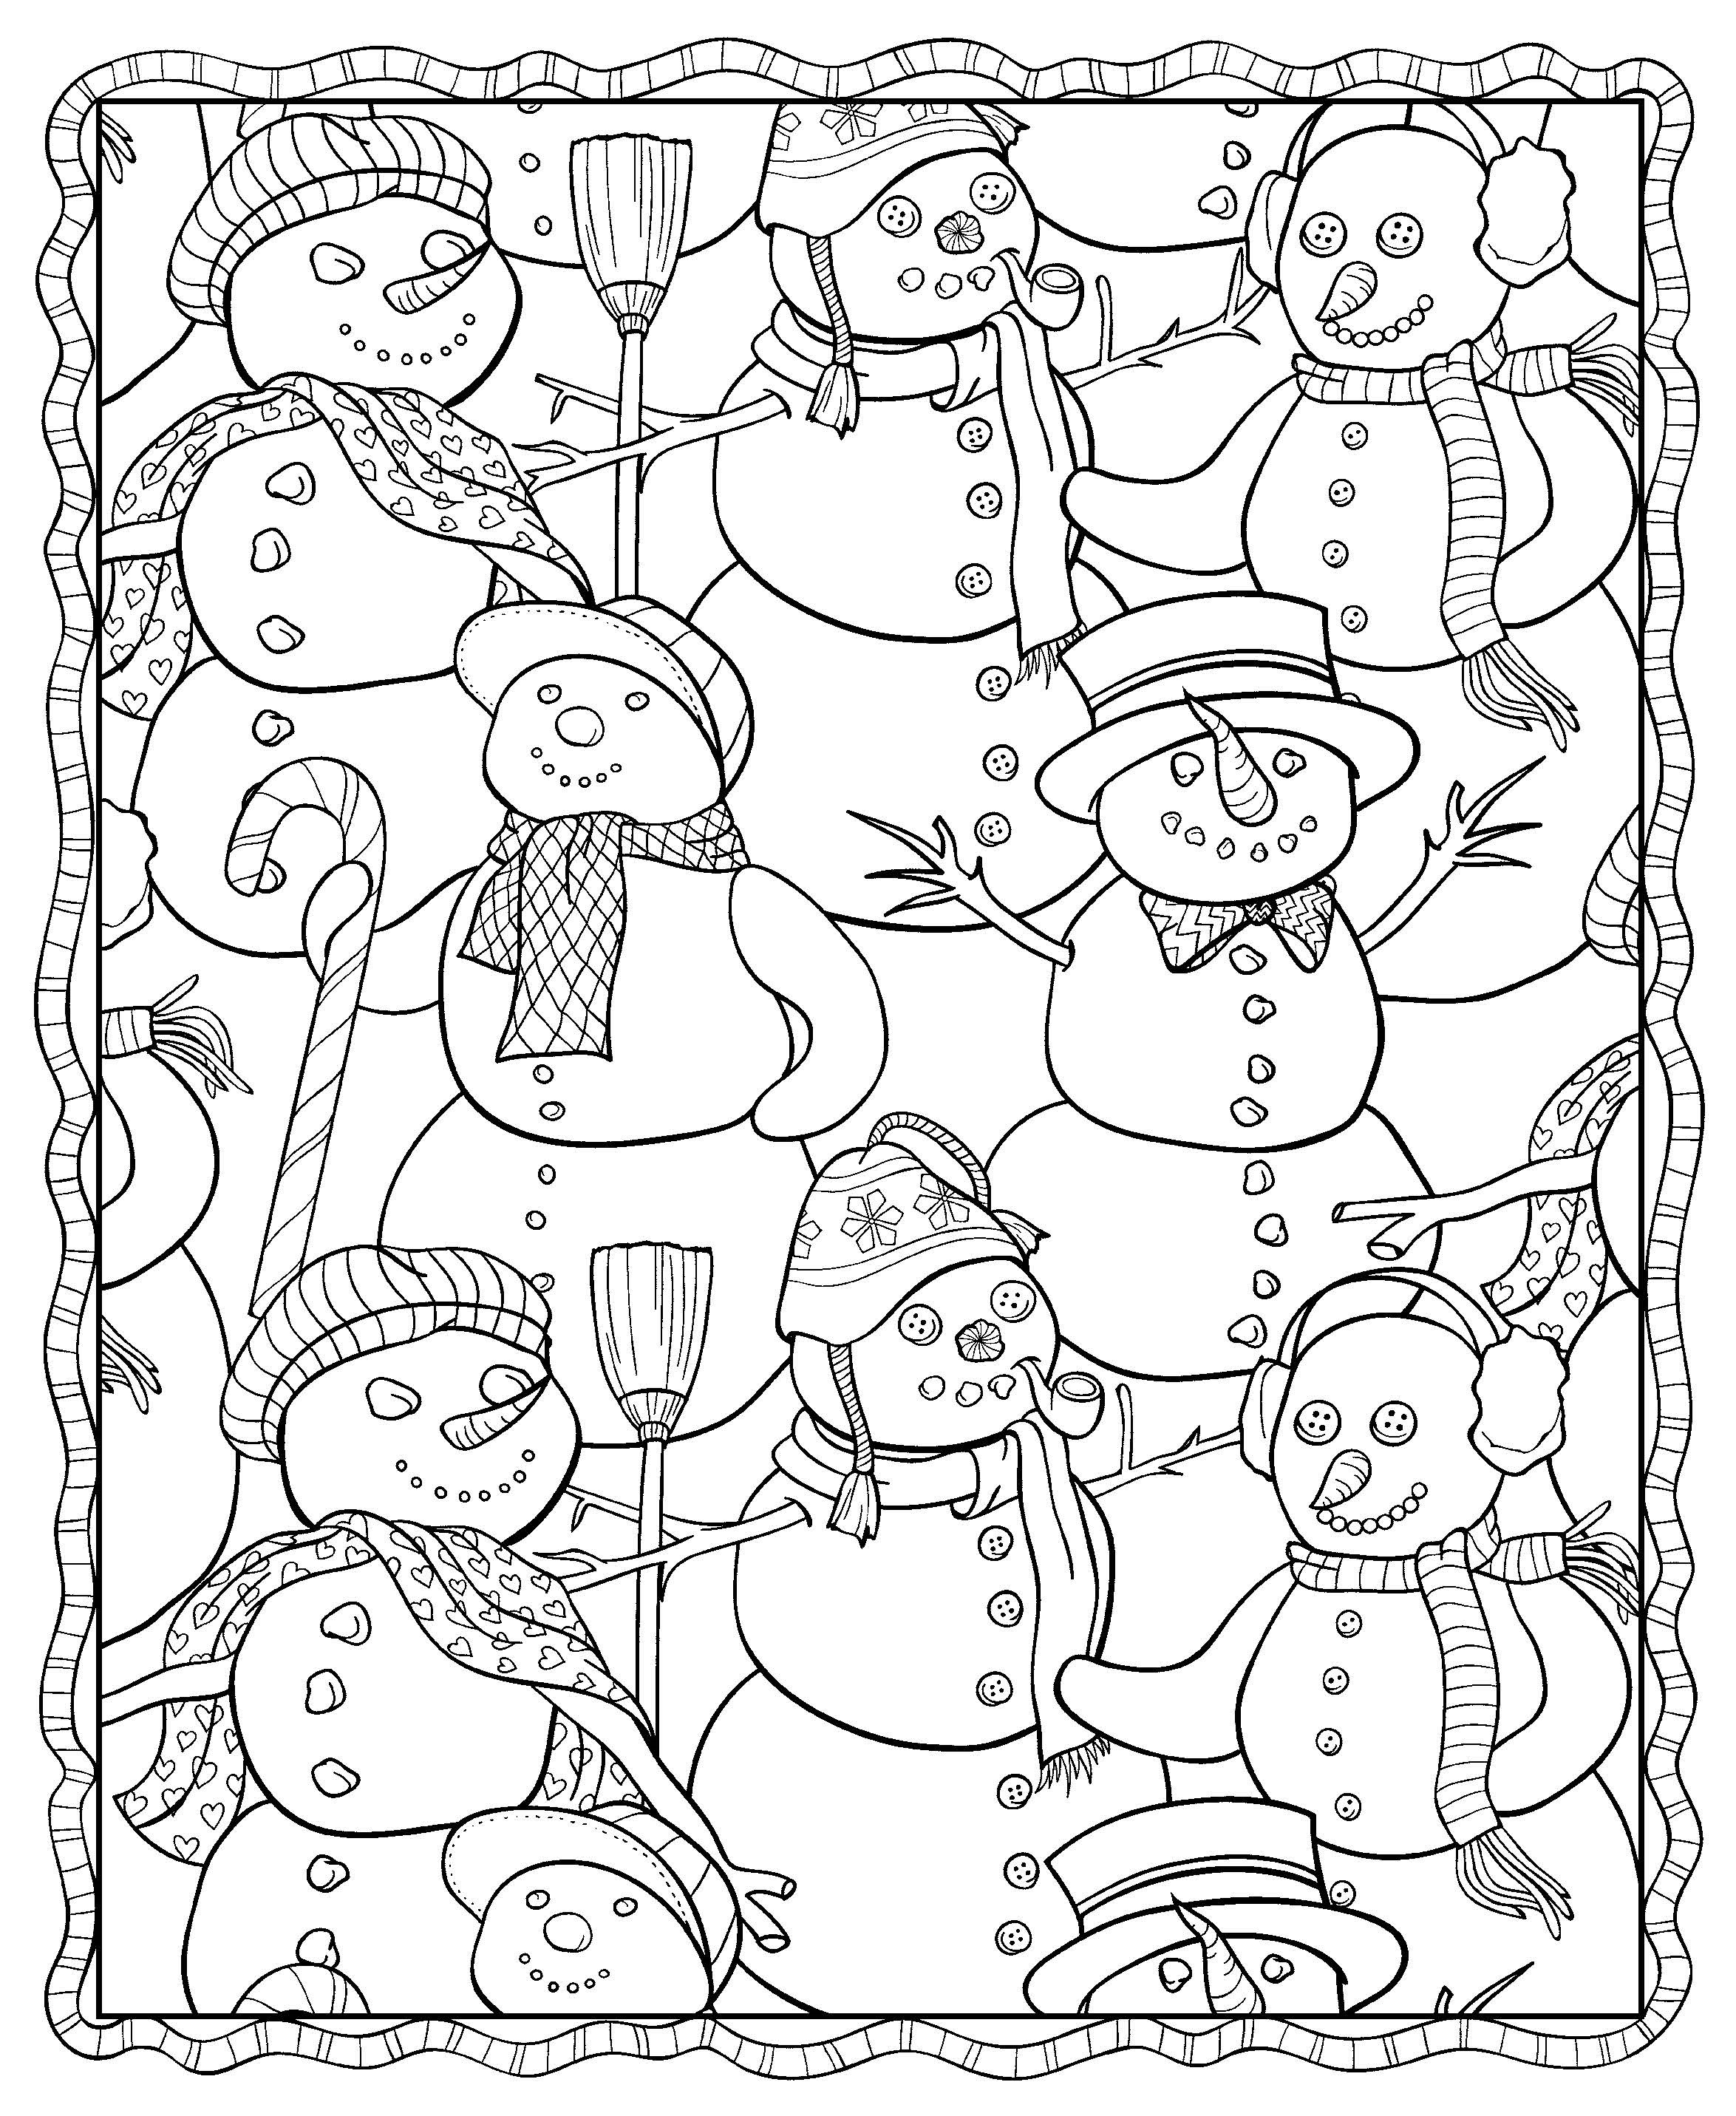 Coloring Pages For Elementary Students Coloring Book Holidayoring Sheets Disney For Elementary Students